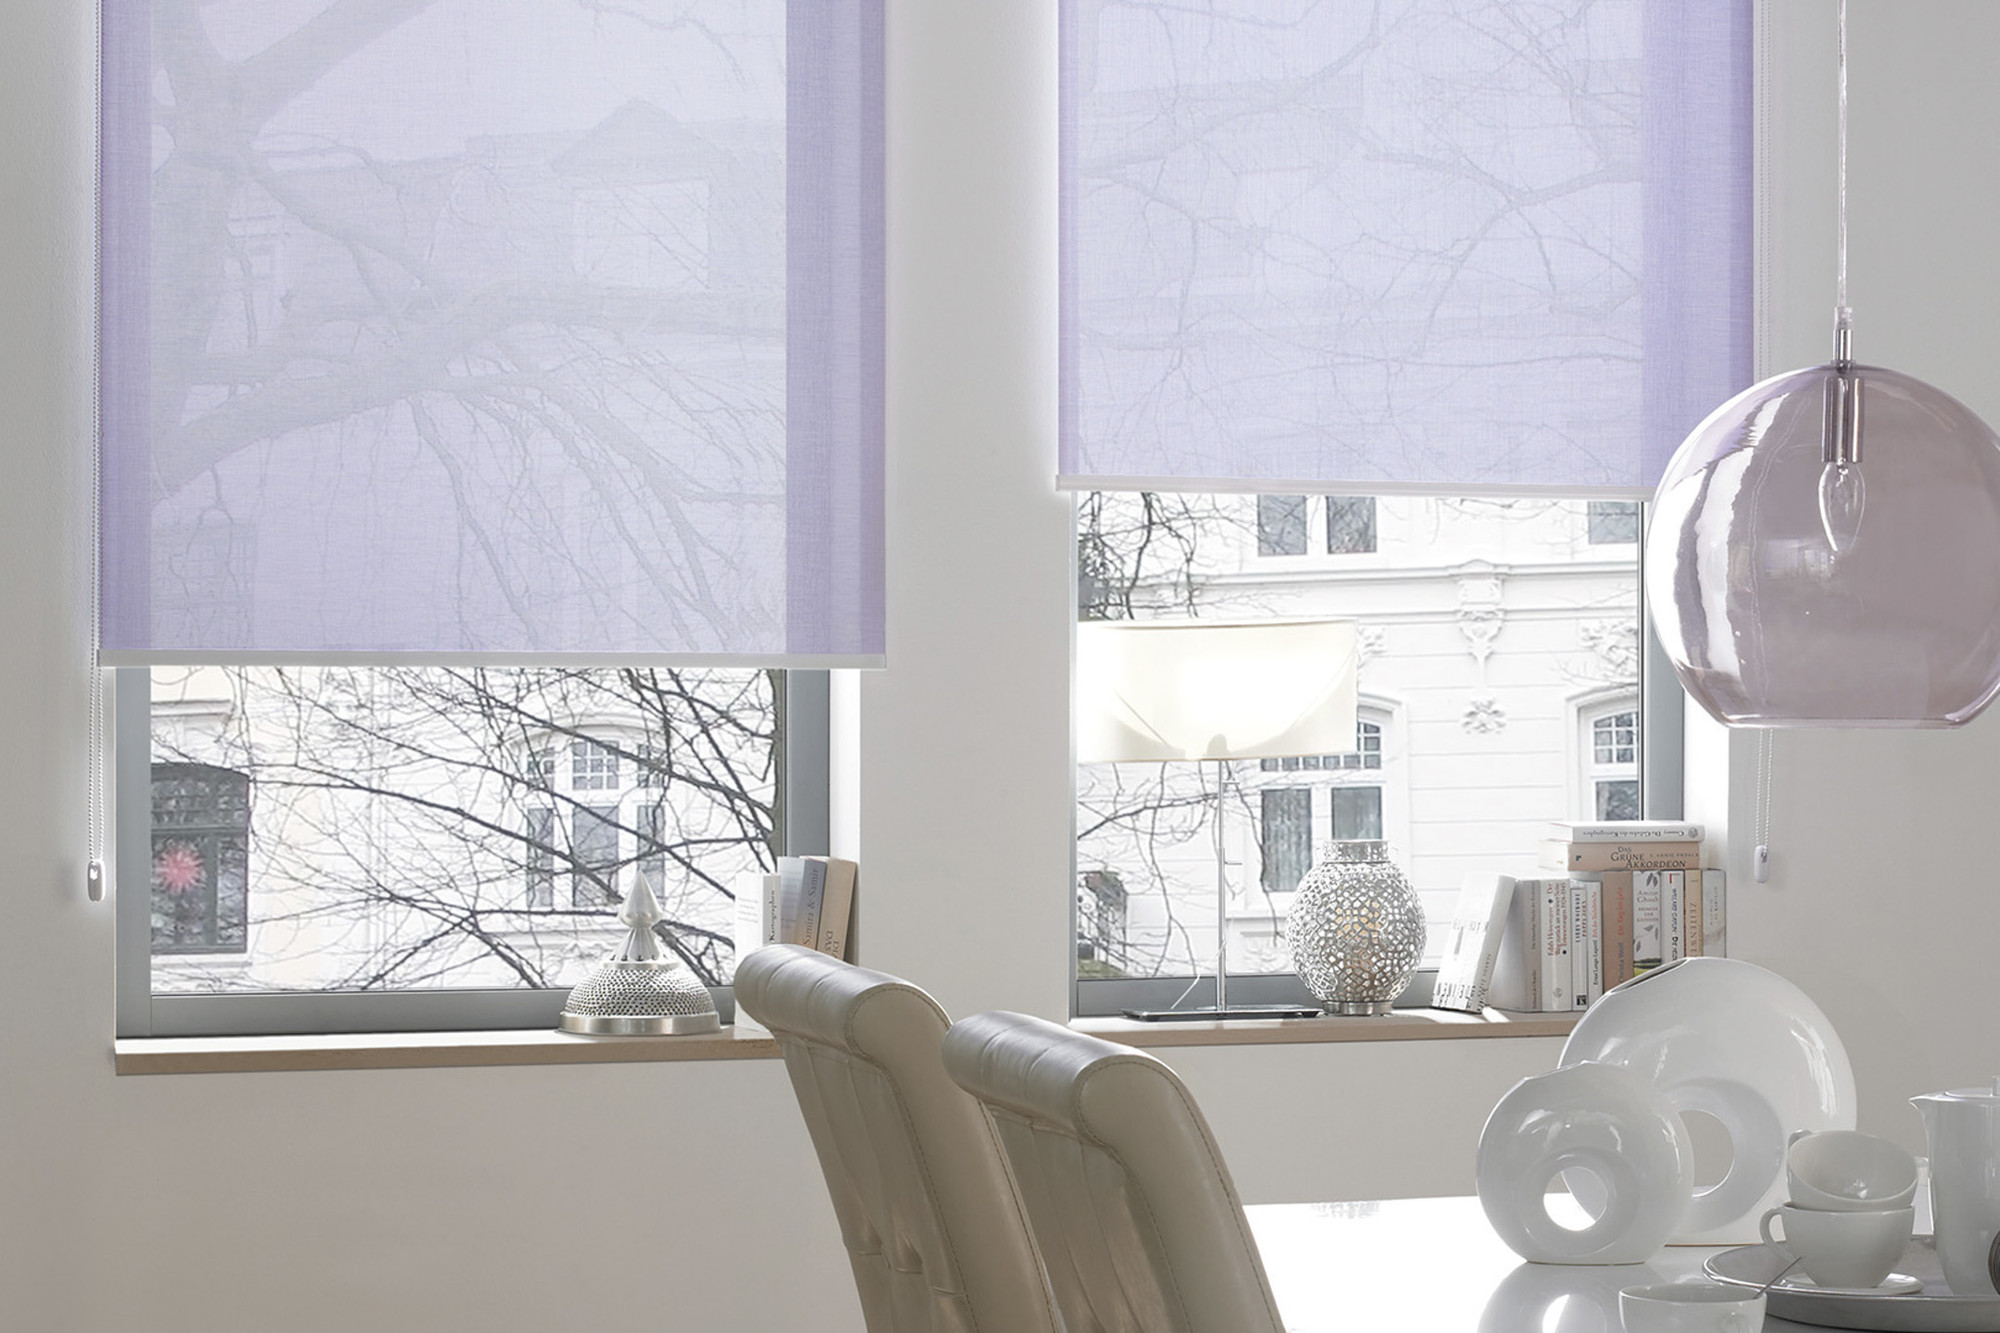 Product: Roller blind